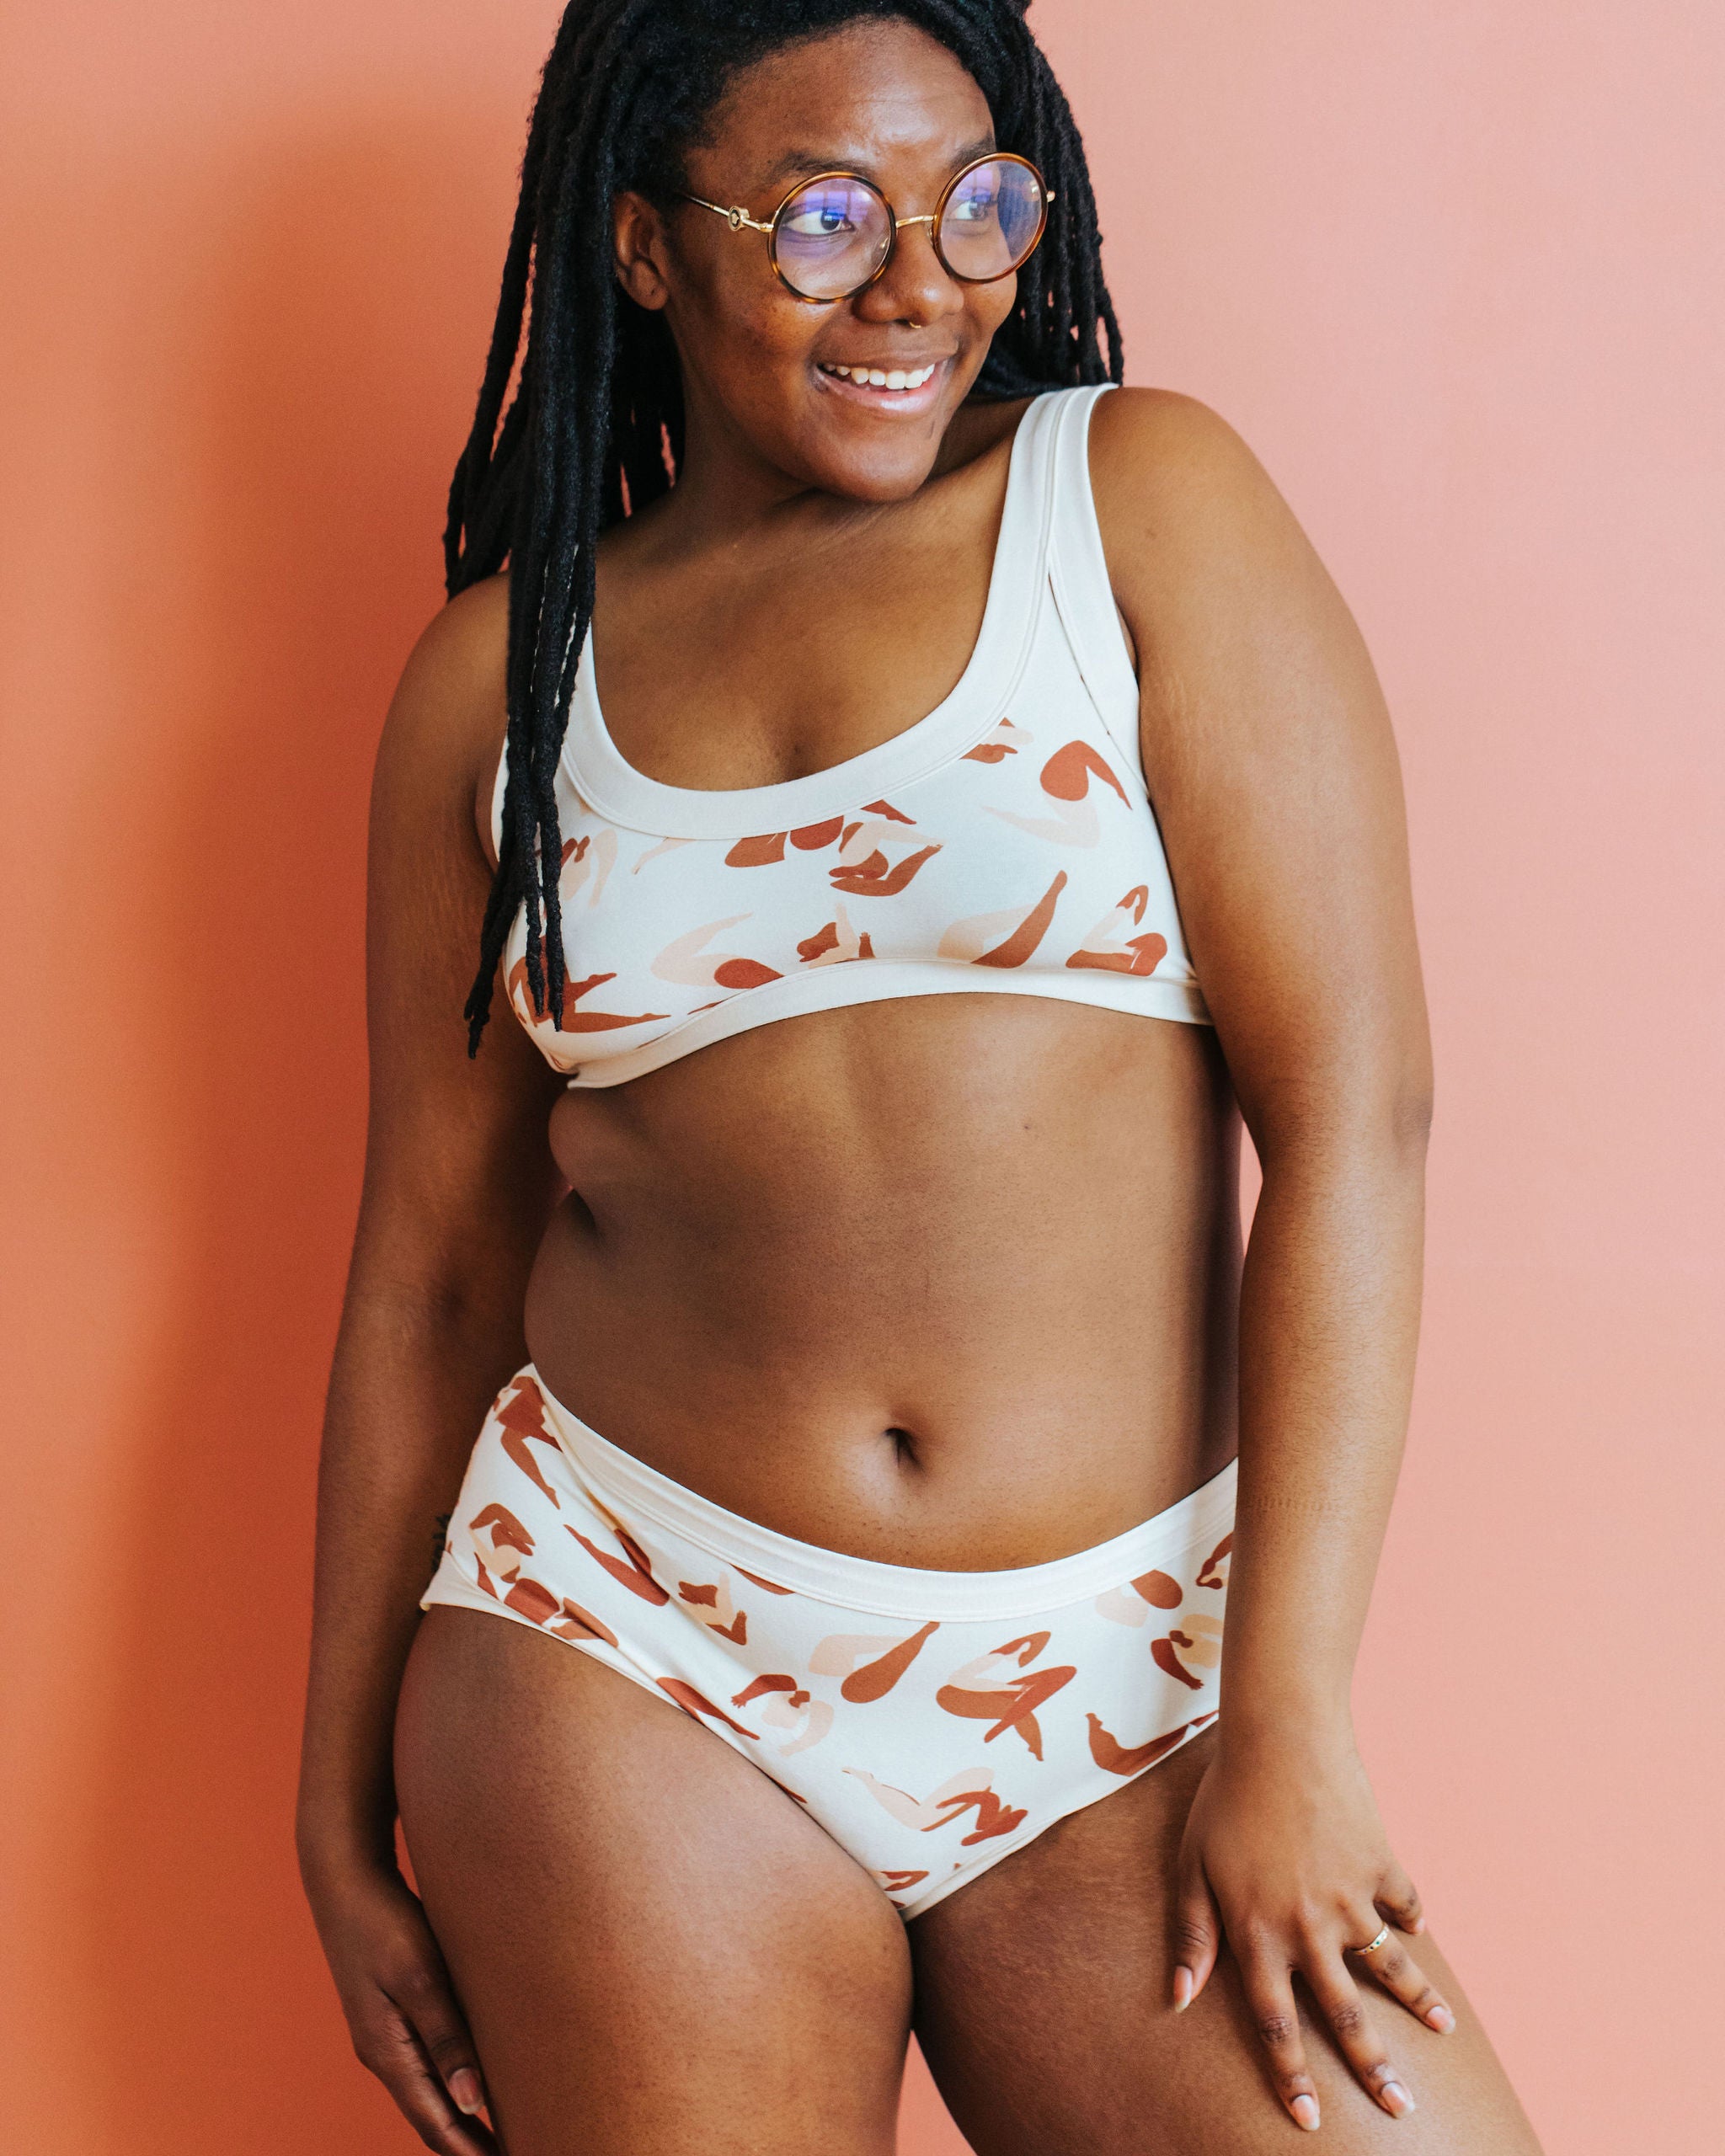 Model smiling wearing Thunderpants Hipster style underwear and Bralette in Bodies in Motion: women in different shades of browns and tans.